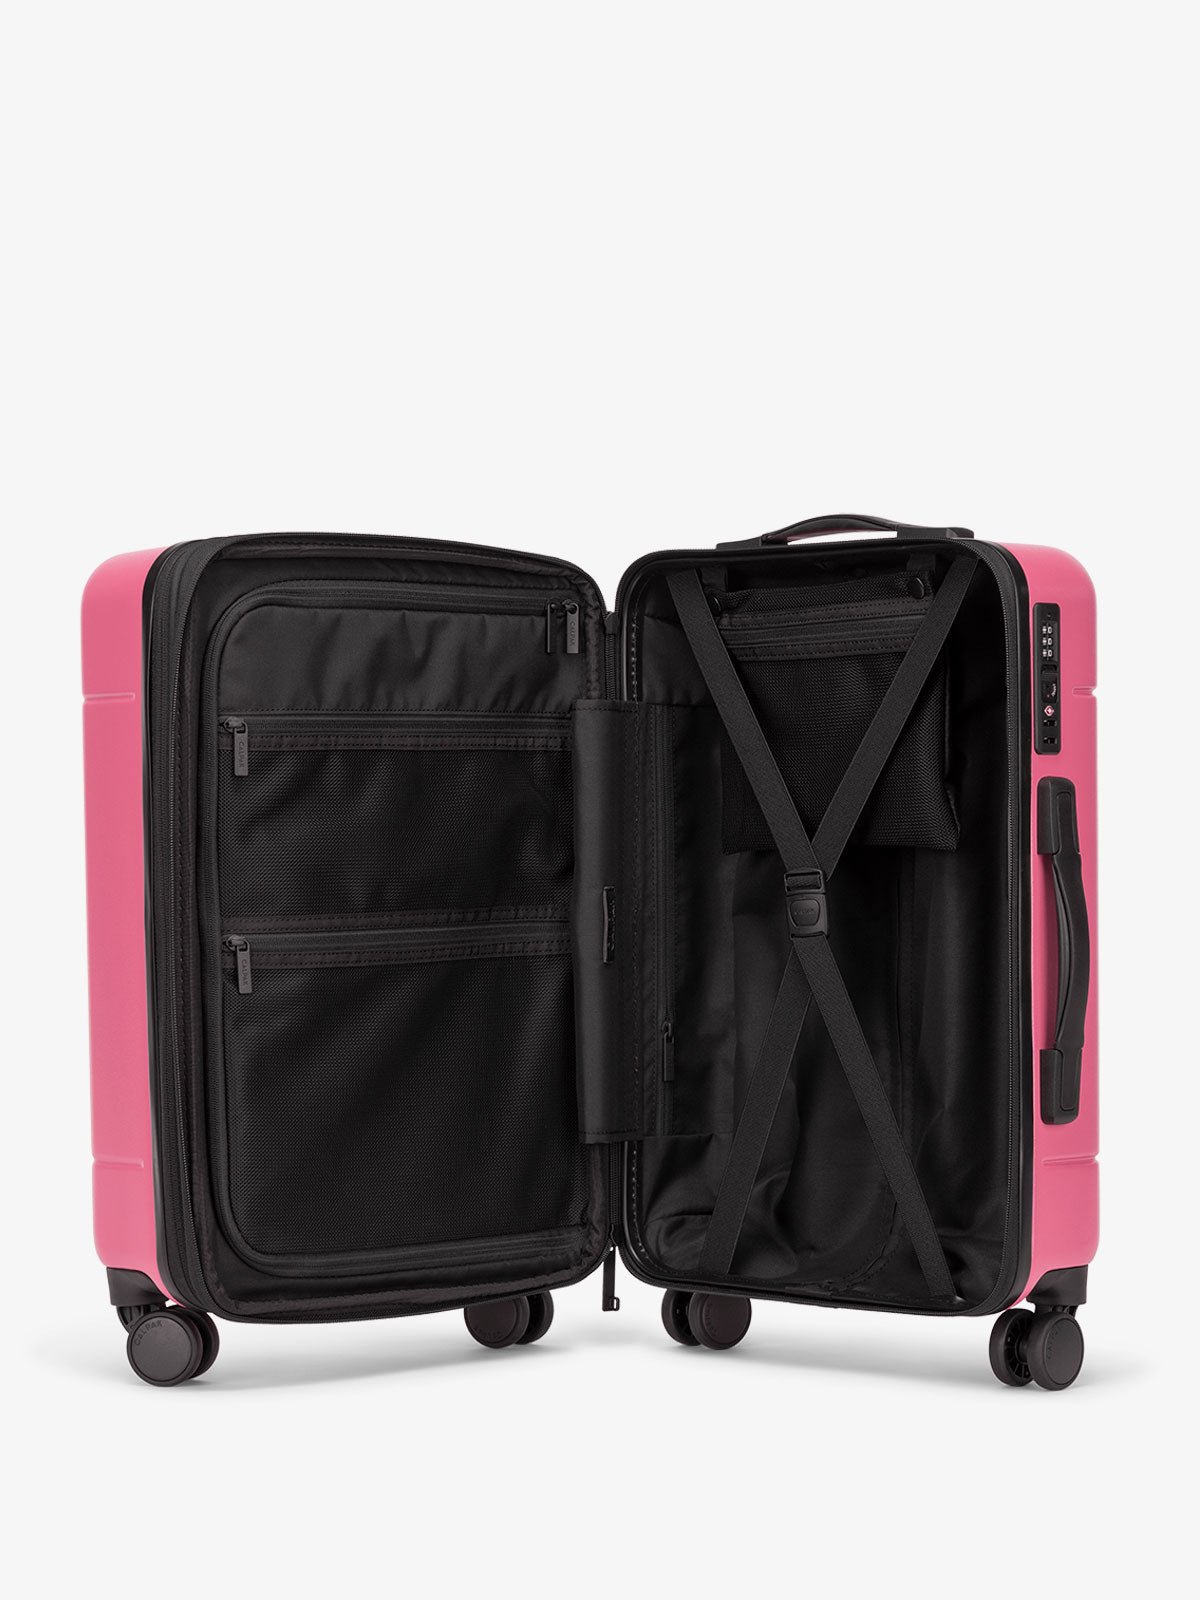 Interior of dragonfruit pink CALPAK Hue Medium Luggage with front pocket and compression straps